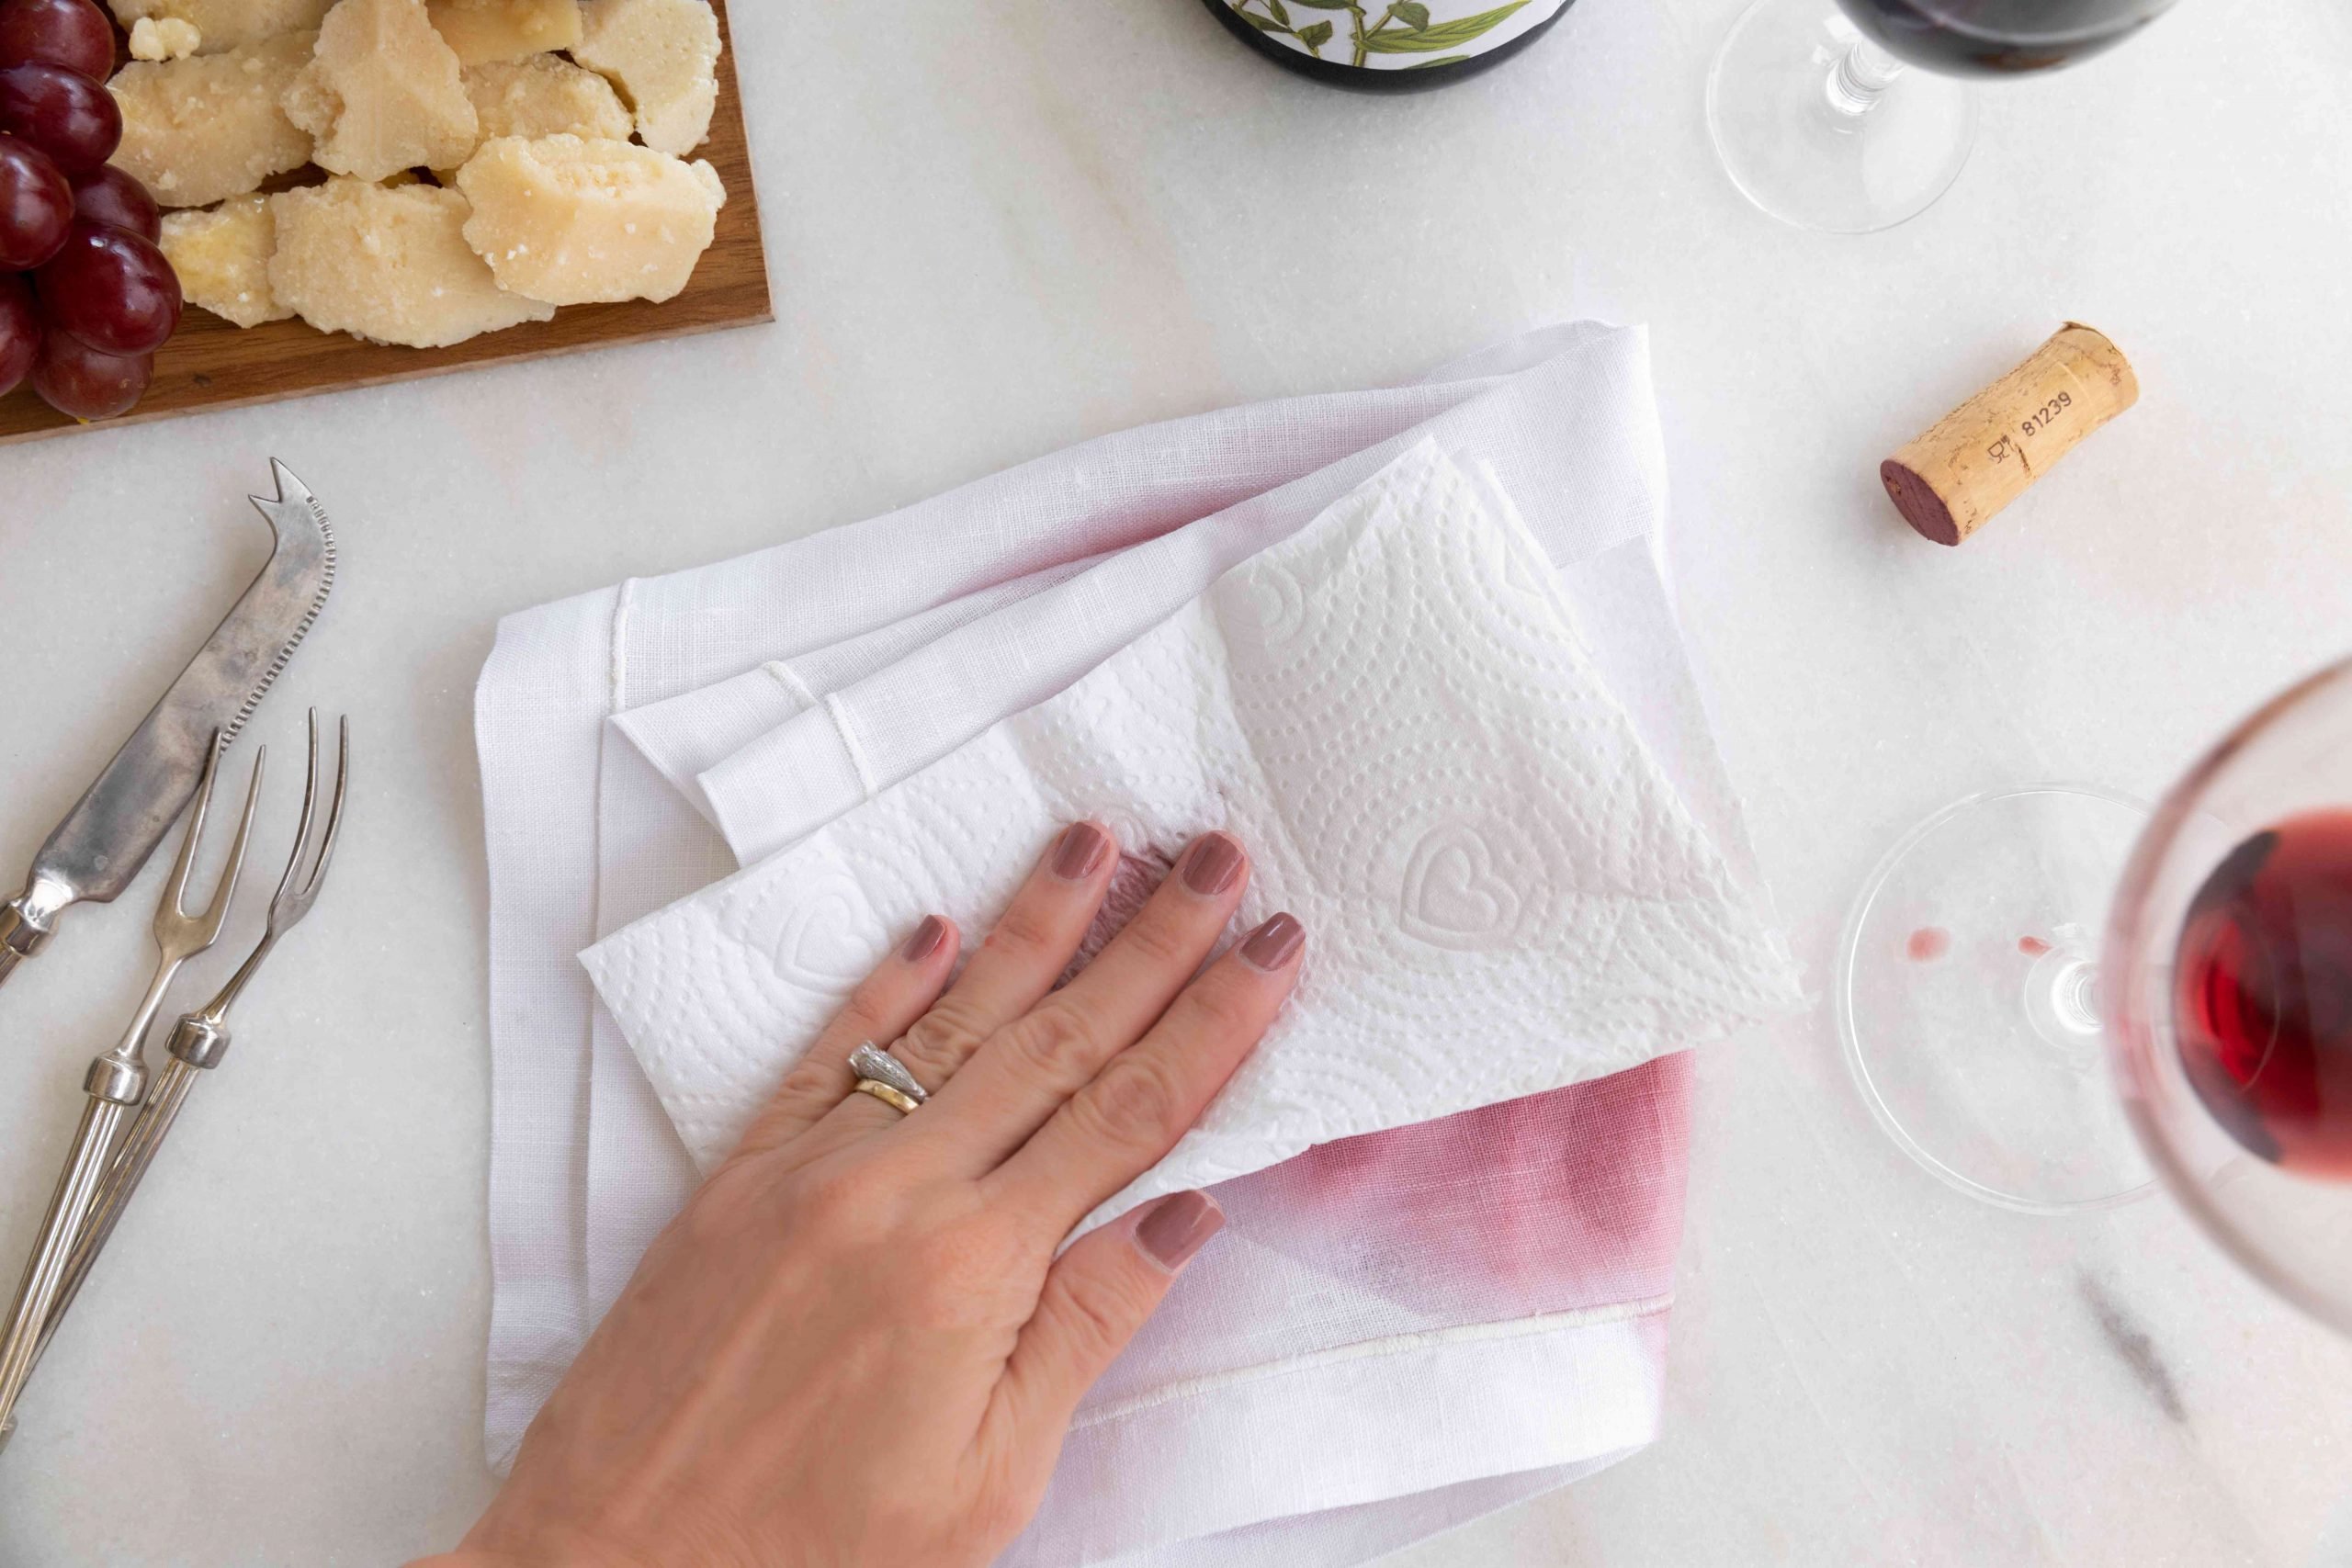 How to Remove Red Wine Stains From Clothing